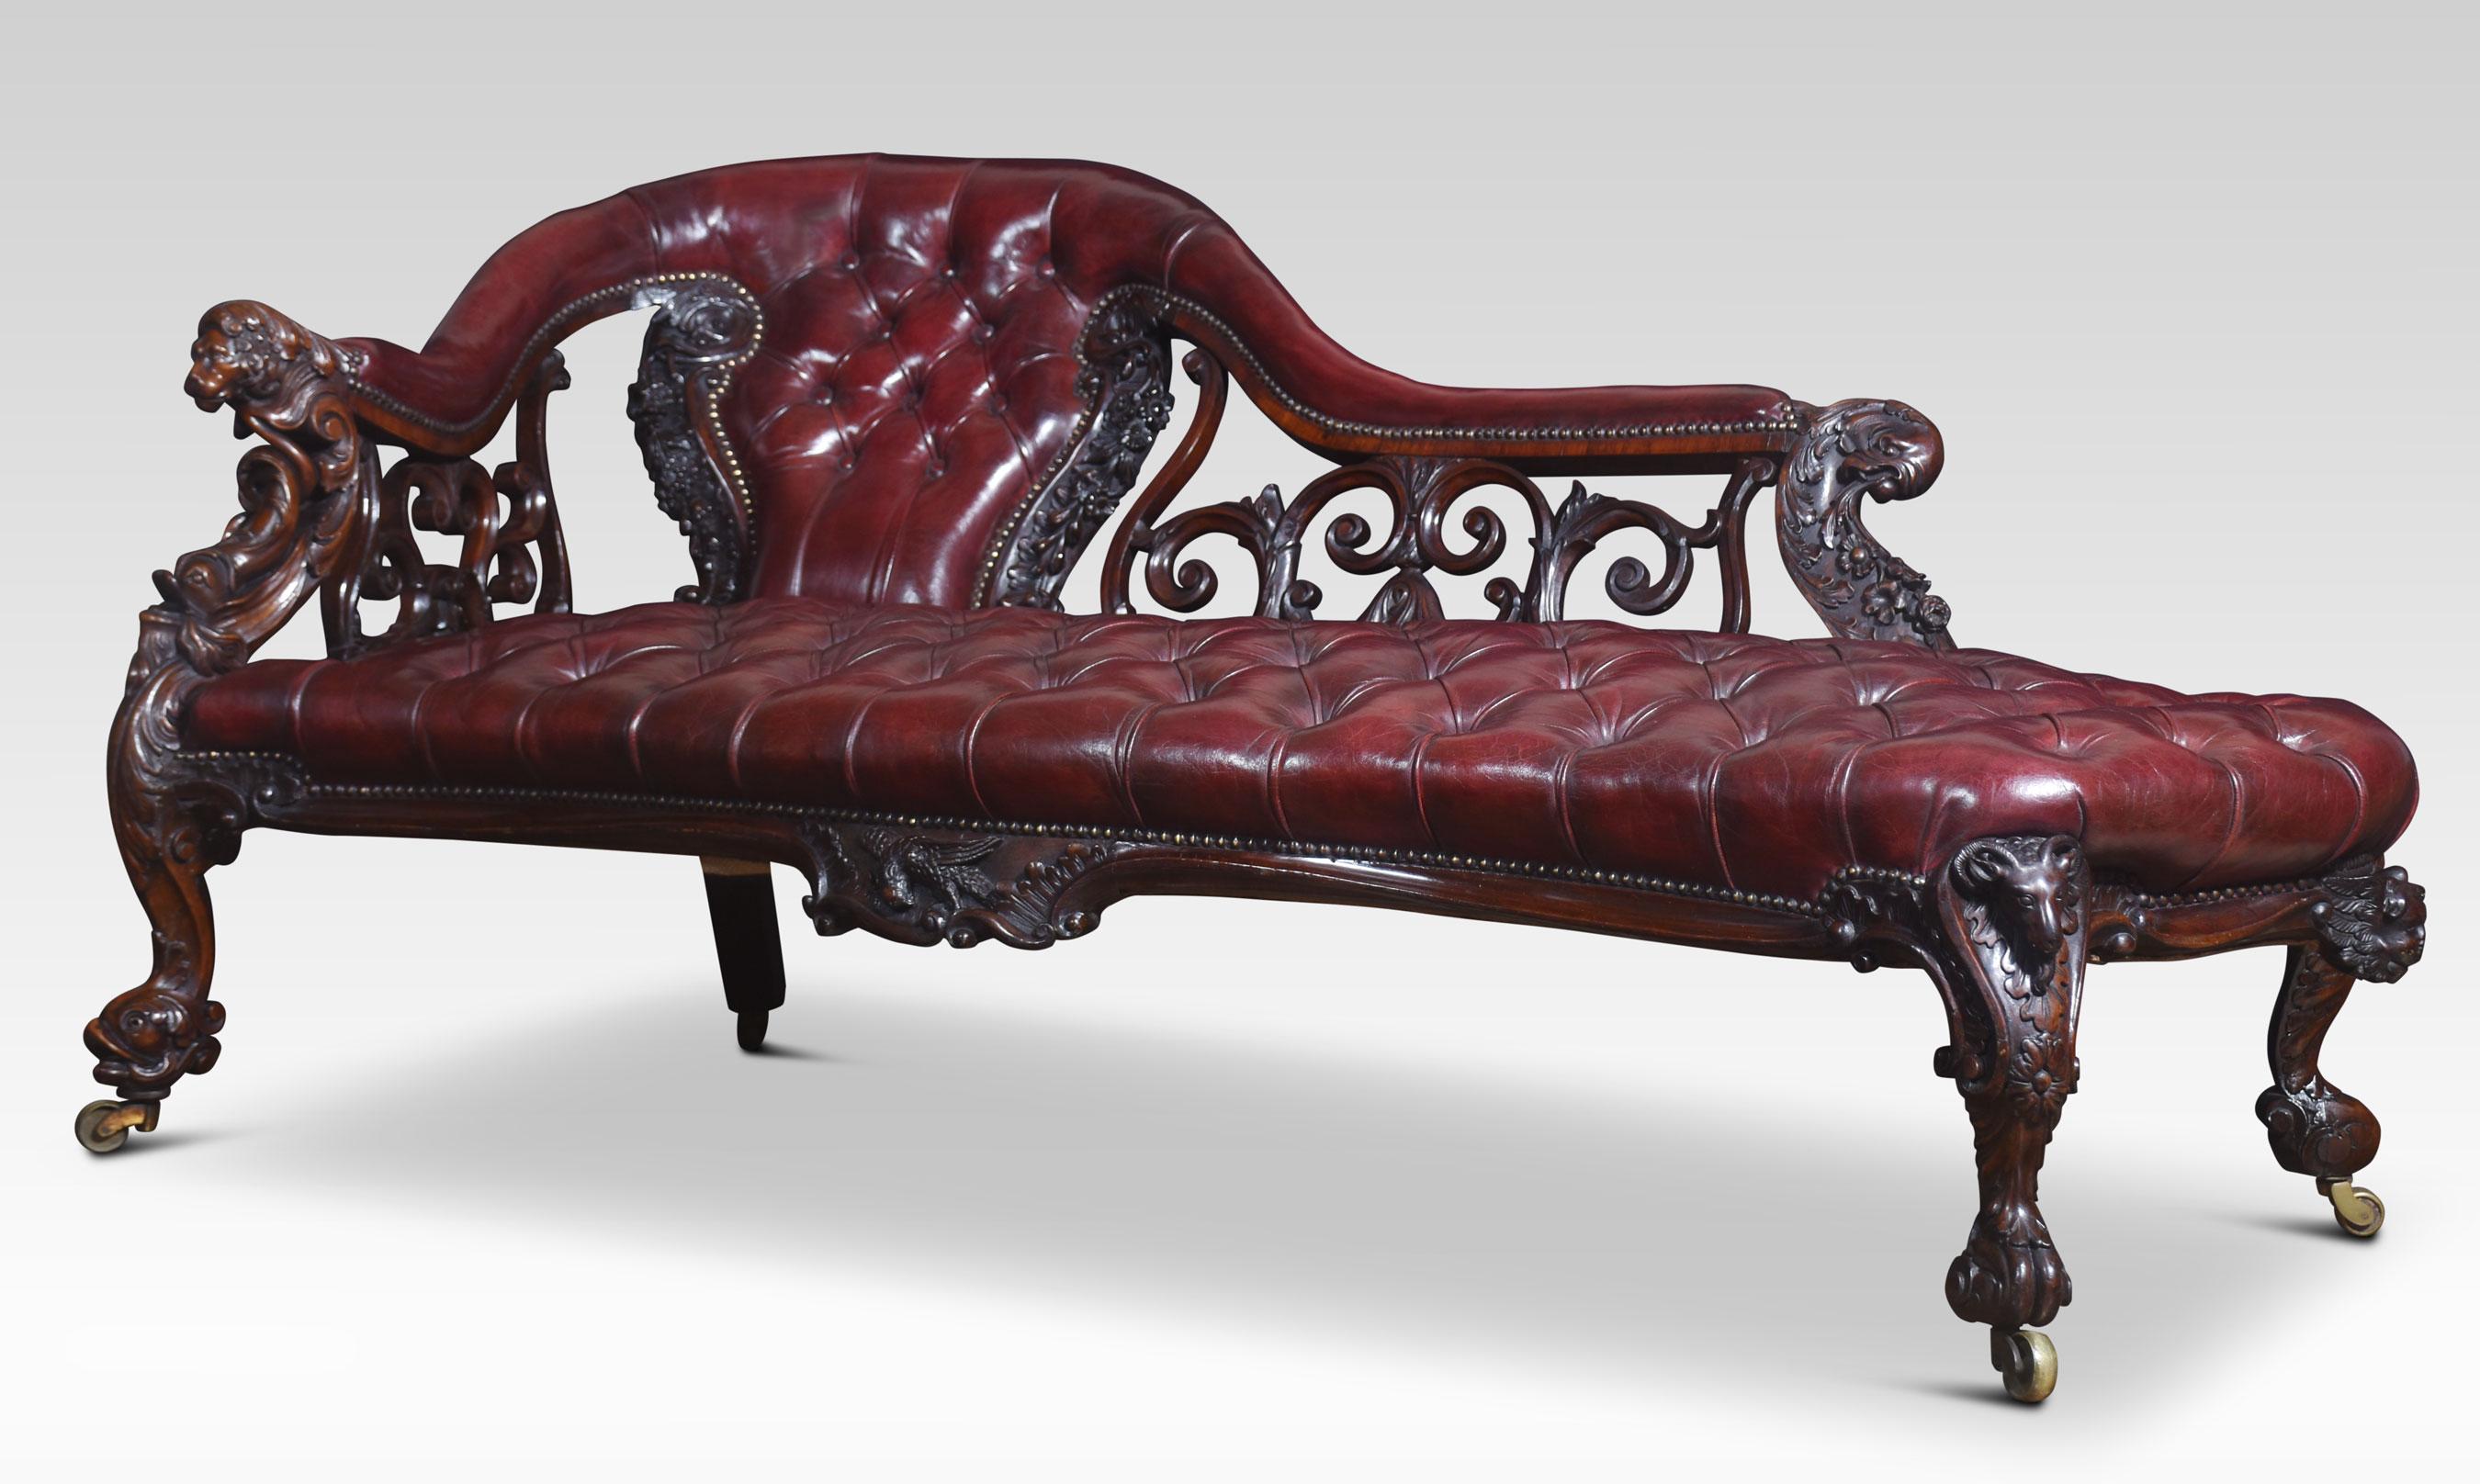 Rococo revival chaise longue, upholstered in burgundy hand-dyed deep buttoned leather. The carved and pierced back with scrolling decoration. To the arms carved with lion heads. All raised up on dolphin head carved feet terminating in brass